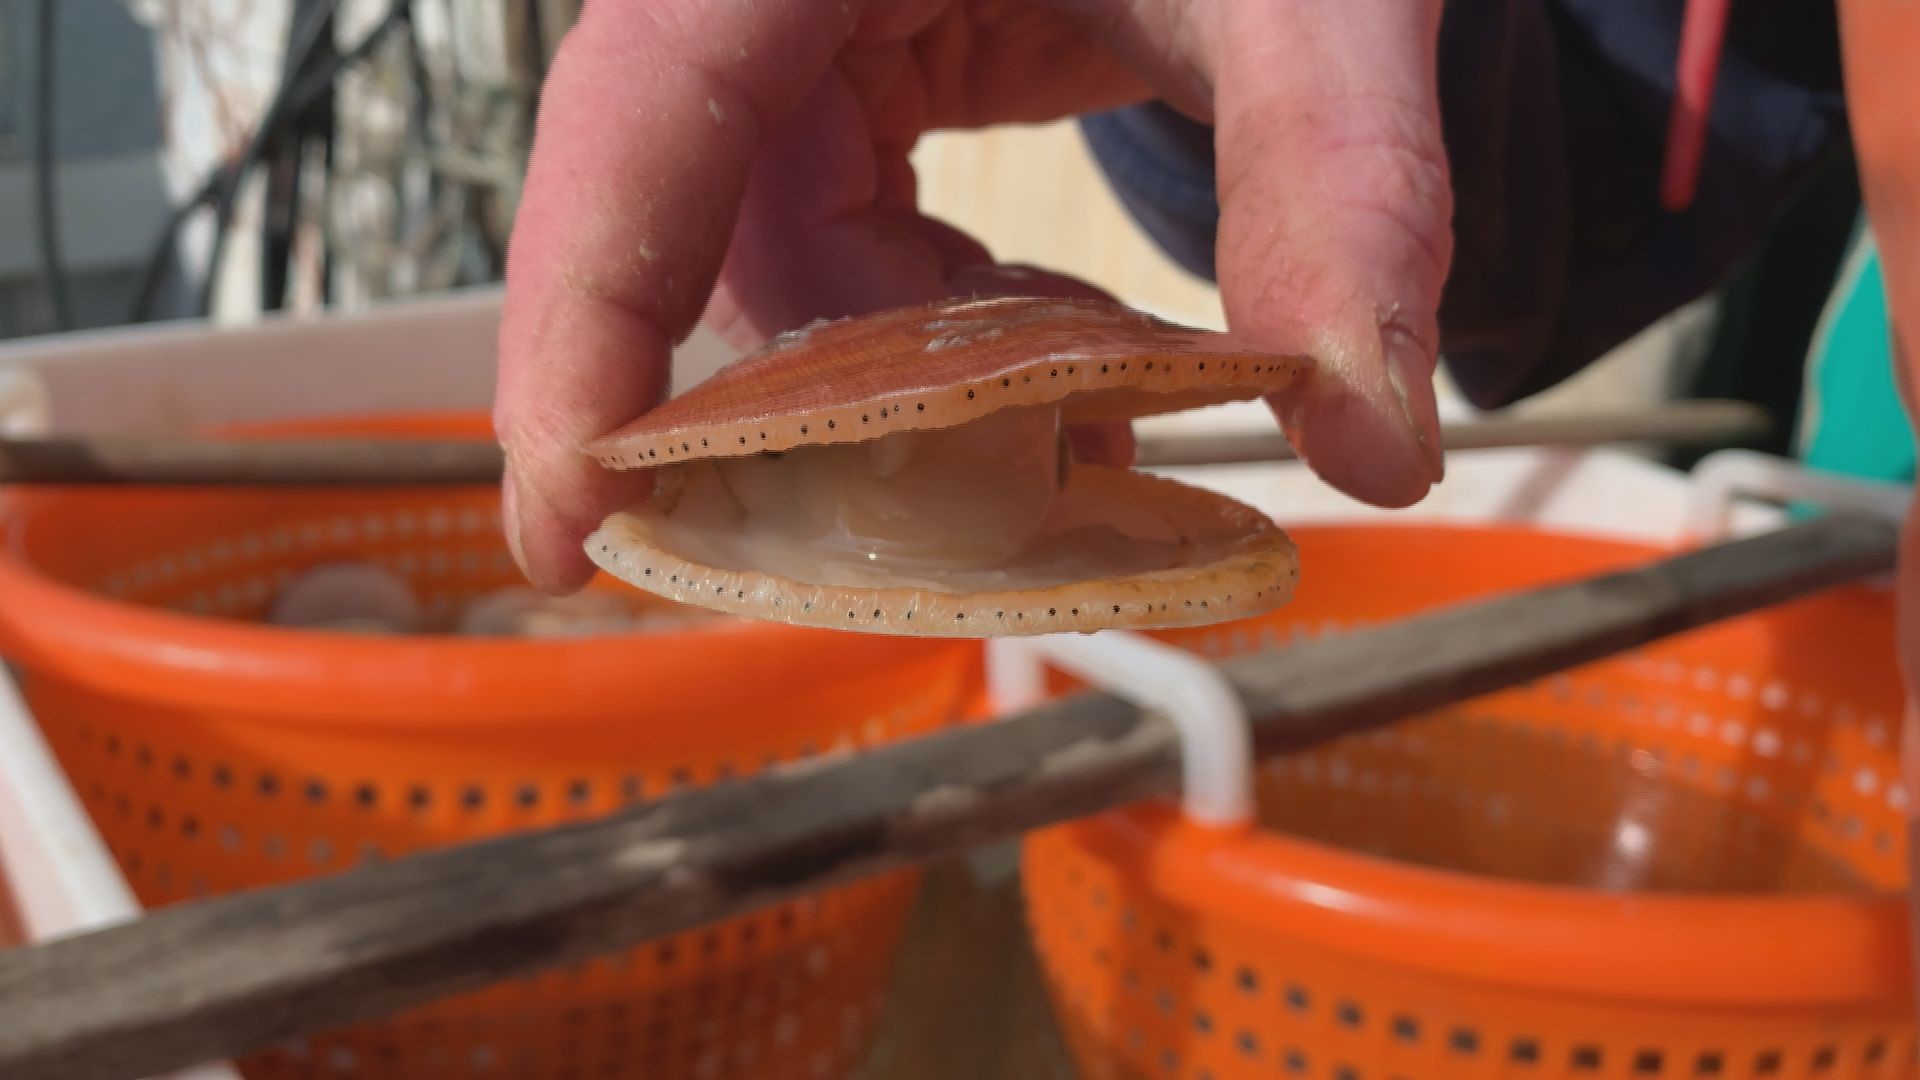 Farmed sea scallops are not only sustainable, they help their habitat. Marsden Brewer started farming scallops in Maine after learning from the Japanese.